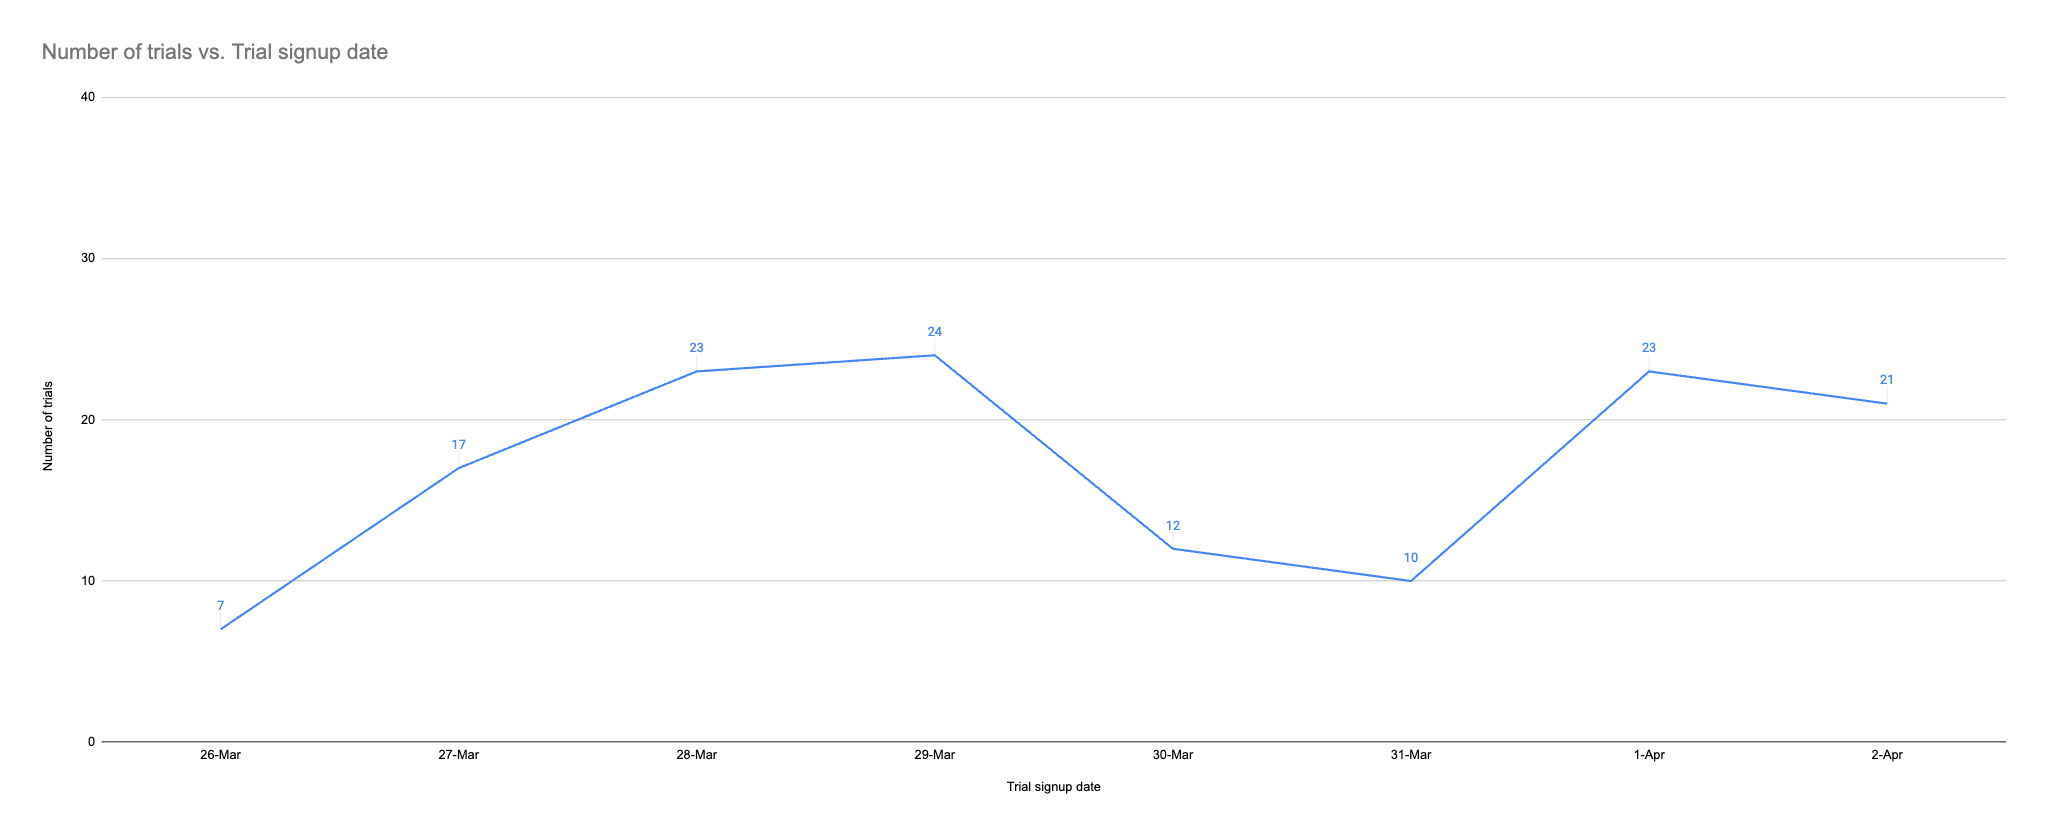 Screenshot of trial signups by date in graphical form. Shows a drop over the weekend and around 20-30 per day.